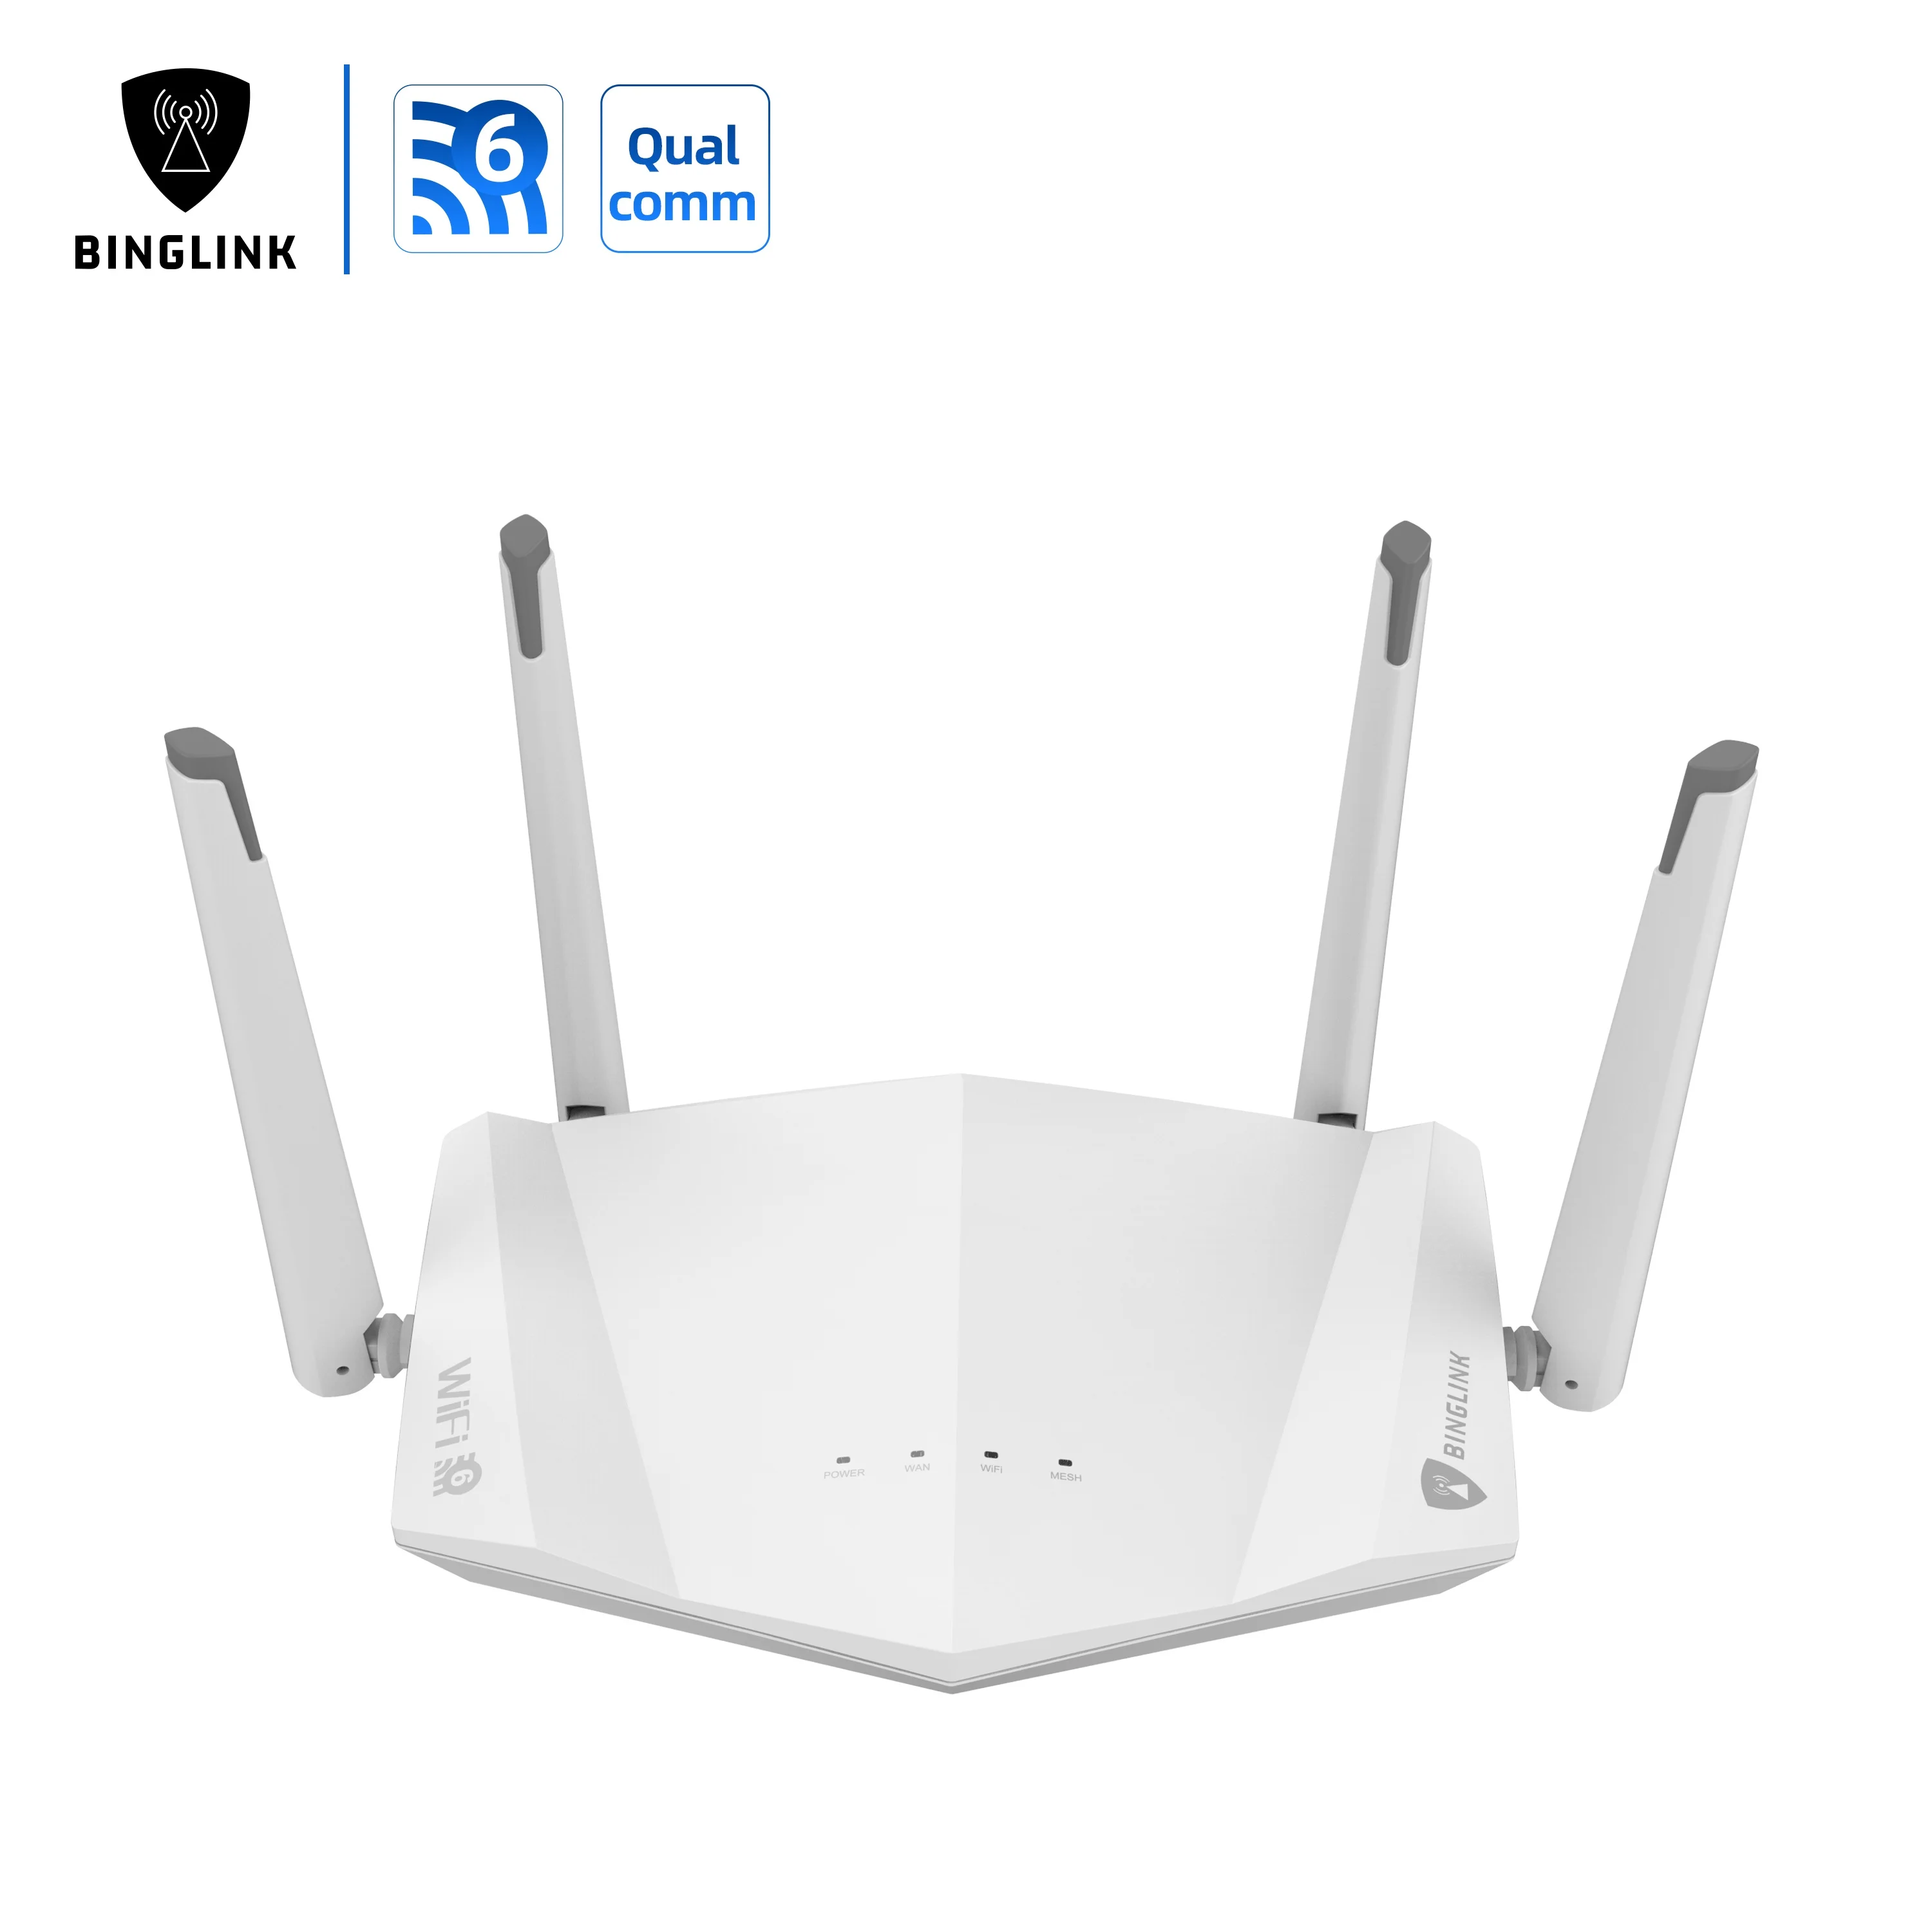 

VPN Server wifii6 1800Mbps Mesh router wifi 6 Dual-Band Gigabit wireless router wifi routers with 4*5dBi External Antennas